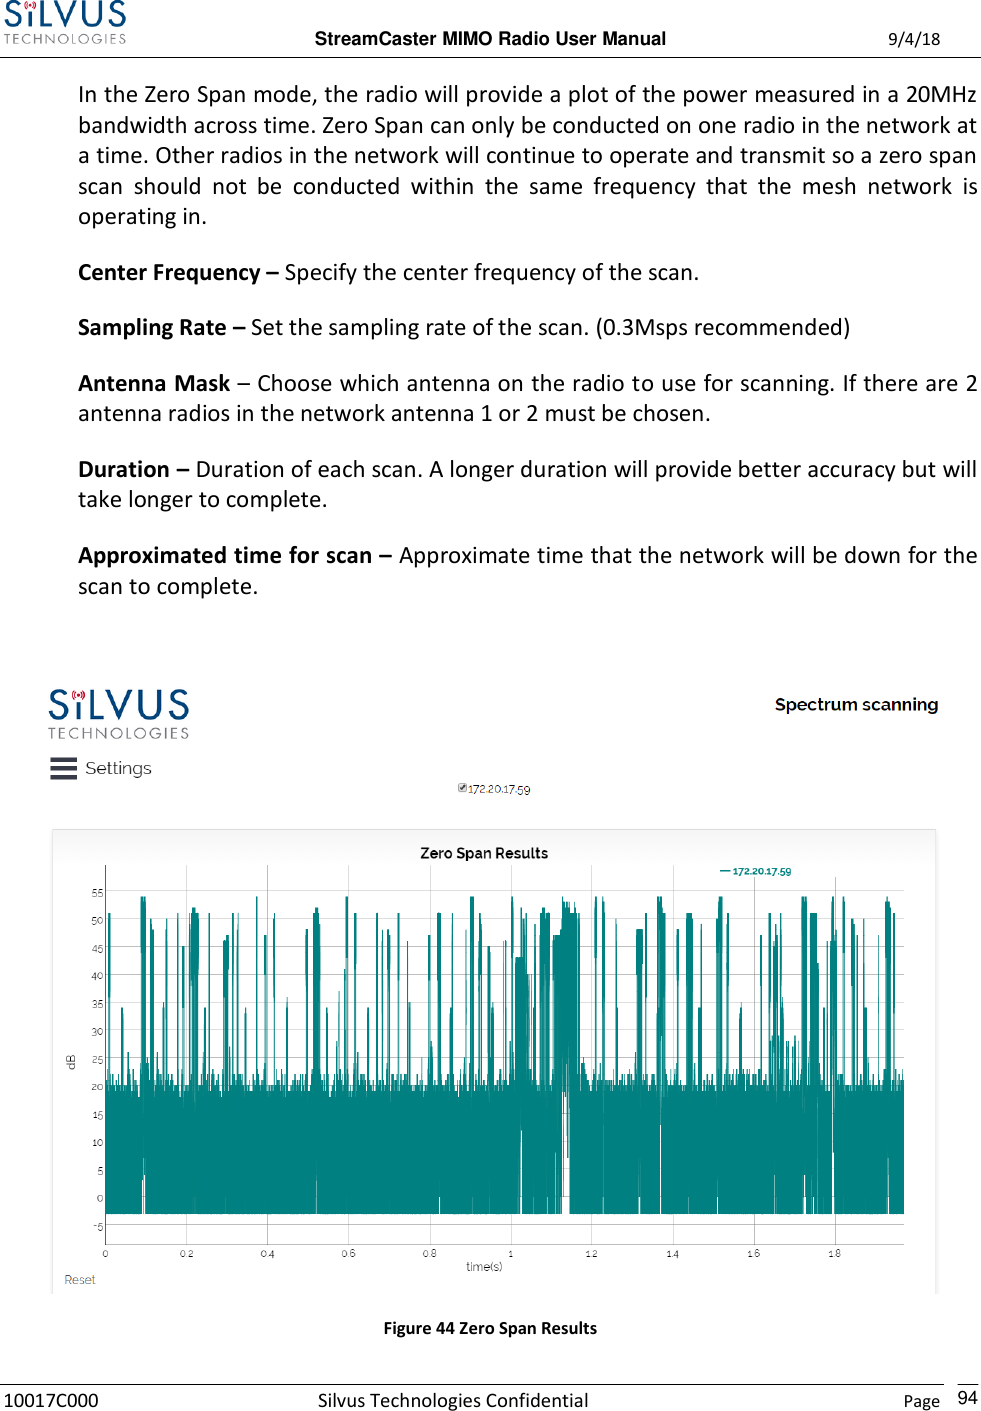  StreamCaster MIMO Radio User Manual  9/4/18 10017C000 Silvus Technologies Confidential    Page    94 In the Zero Span mode, the radio will provide a plot of the power measured in a 20MHz bandwidth across time. Zero Span can only be conducted on one radio in the network at a time. Other radios in the network will continue to operate and transmit so a zero span scan  should  not  be  conducted  within  the  same  frequency  that  the  mesh  network  is operating in. Center Frequency – Specify the center frequency of the scan. Sampling Rate – Set the sampling rate of the scan. (0.3Msps recommended) Antenna Mask – Choose which antenna on the radio to use for scanning. If there are 2 antenna radios in the network antenna 1 or 2 must be chosen. Duration – Duration of each scan. A longer duration will provide better accuracy but will take longer to complete. Approximated time for scan – Approximate time that the network will be down for the scan to complete.   Figure 44 Zero Span Results 